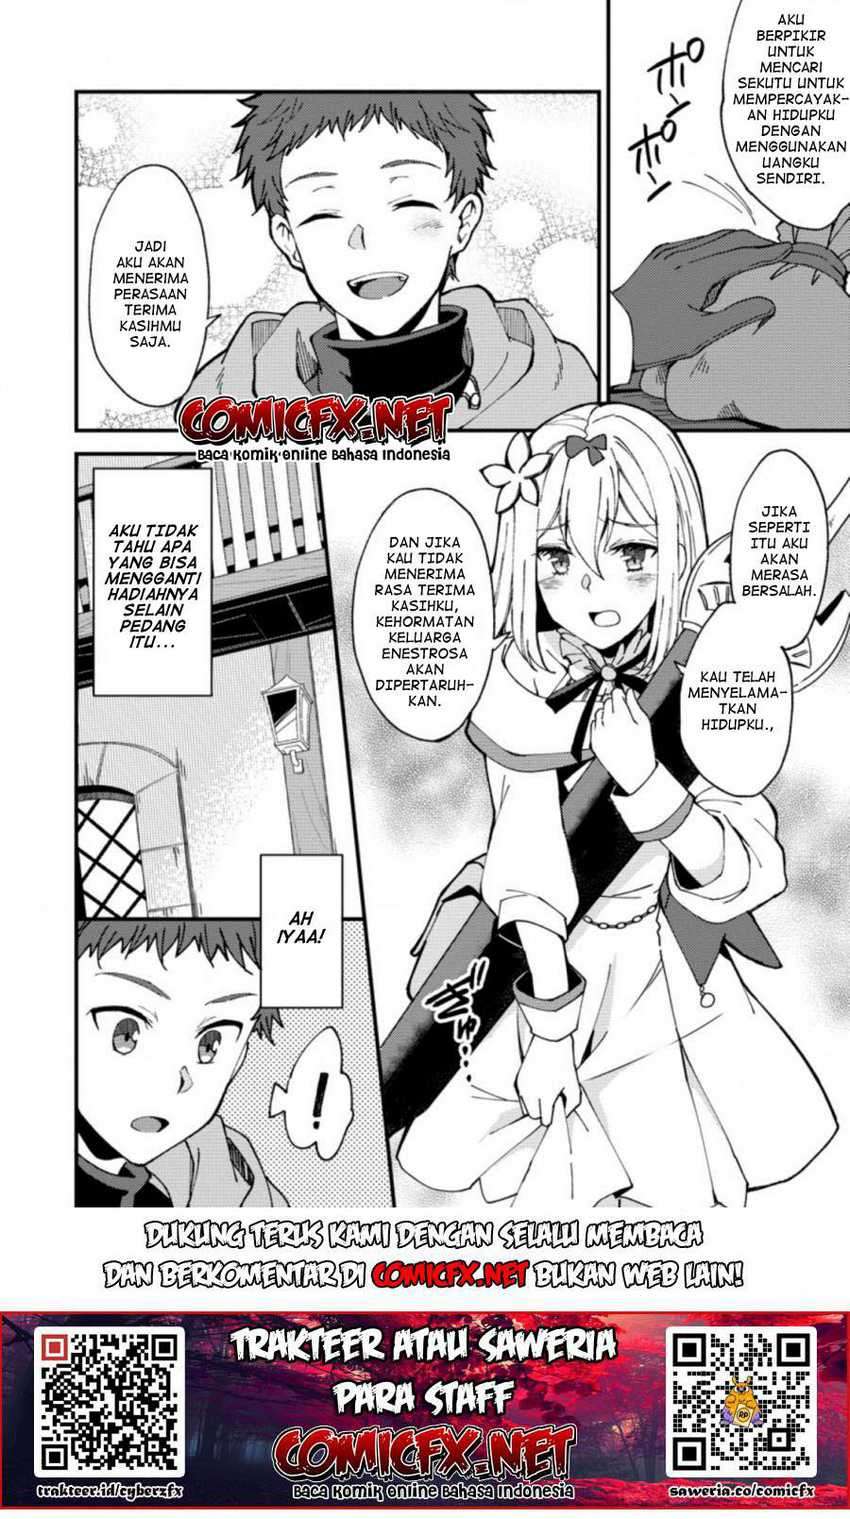 A Sword Master Childhood Friend Power Harassed Me Harshly, So I Broke off Our Relationship and Make a Fresh Start at the Frontier as a Magic Swordsman Chapter 04.1